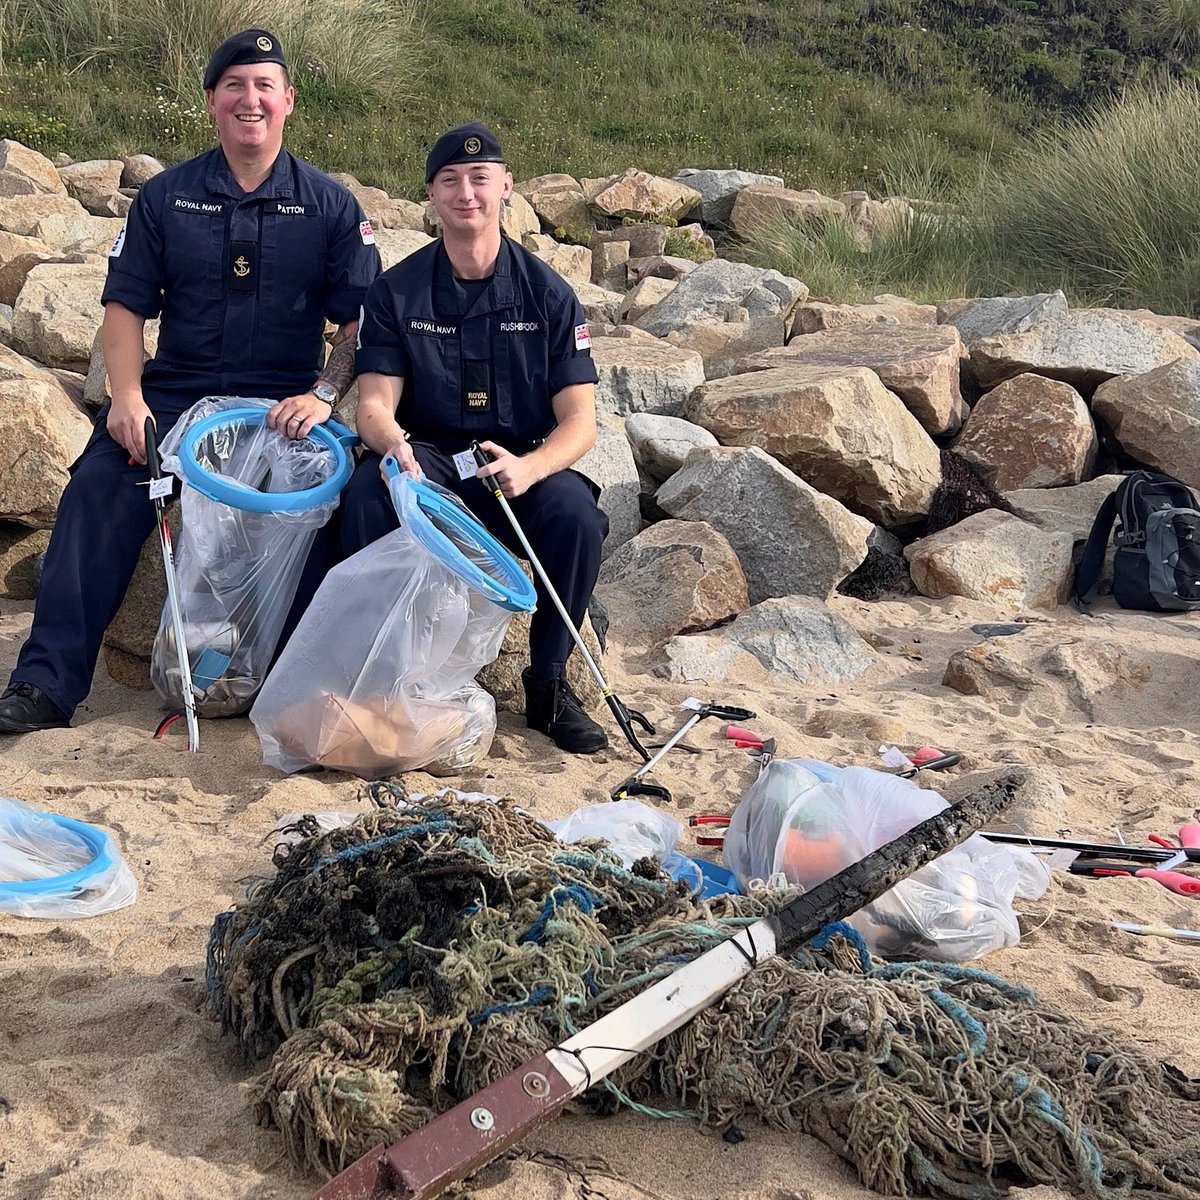 Merlin helicopter engineers from RNAS Culdrose gathered 37kg of old fishing nets and other rubbish from Praa Sands #Helston, a popular beach near their air station in #Cornwall. @FirstSeaLord @RoyalNavy #RN1TonneChallenge #beachclean #BZ